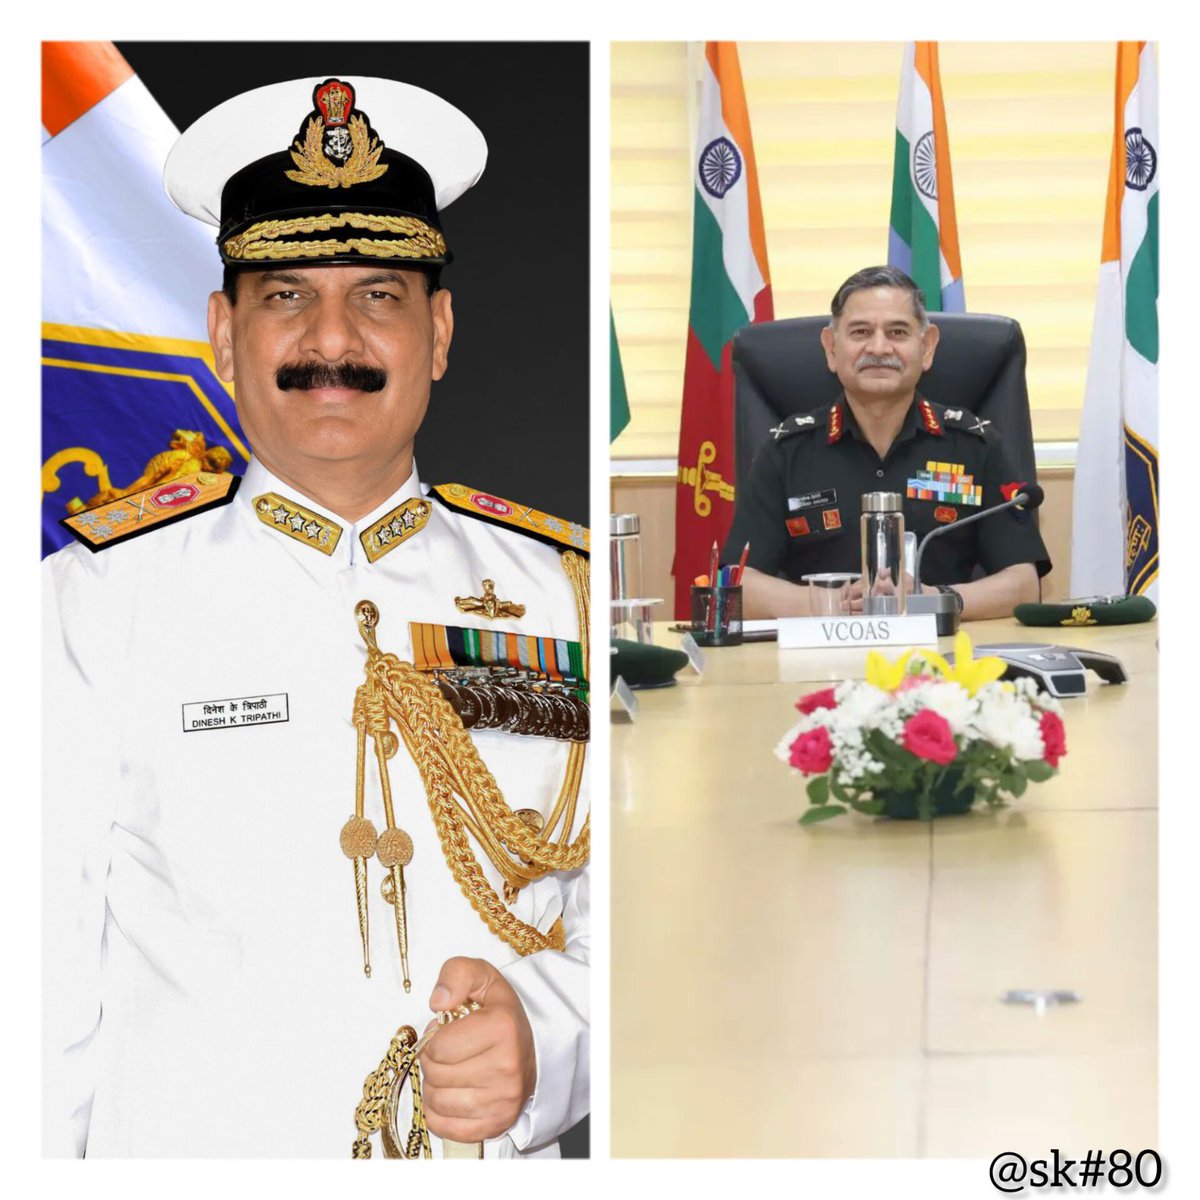 Meet next COAS and CONS.   
Alumnus of #SainikSchoolRewa
▪️Vice-Admiral Dinesh  Tripathi to be the next chief of naval staff( left)
▪️Lt Gen Upendra Dwivedi to be the next chief of army staff (right)
#sainwinian
#IndianArmy 
#IndianNavy 
@Spearcorps